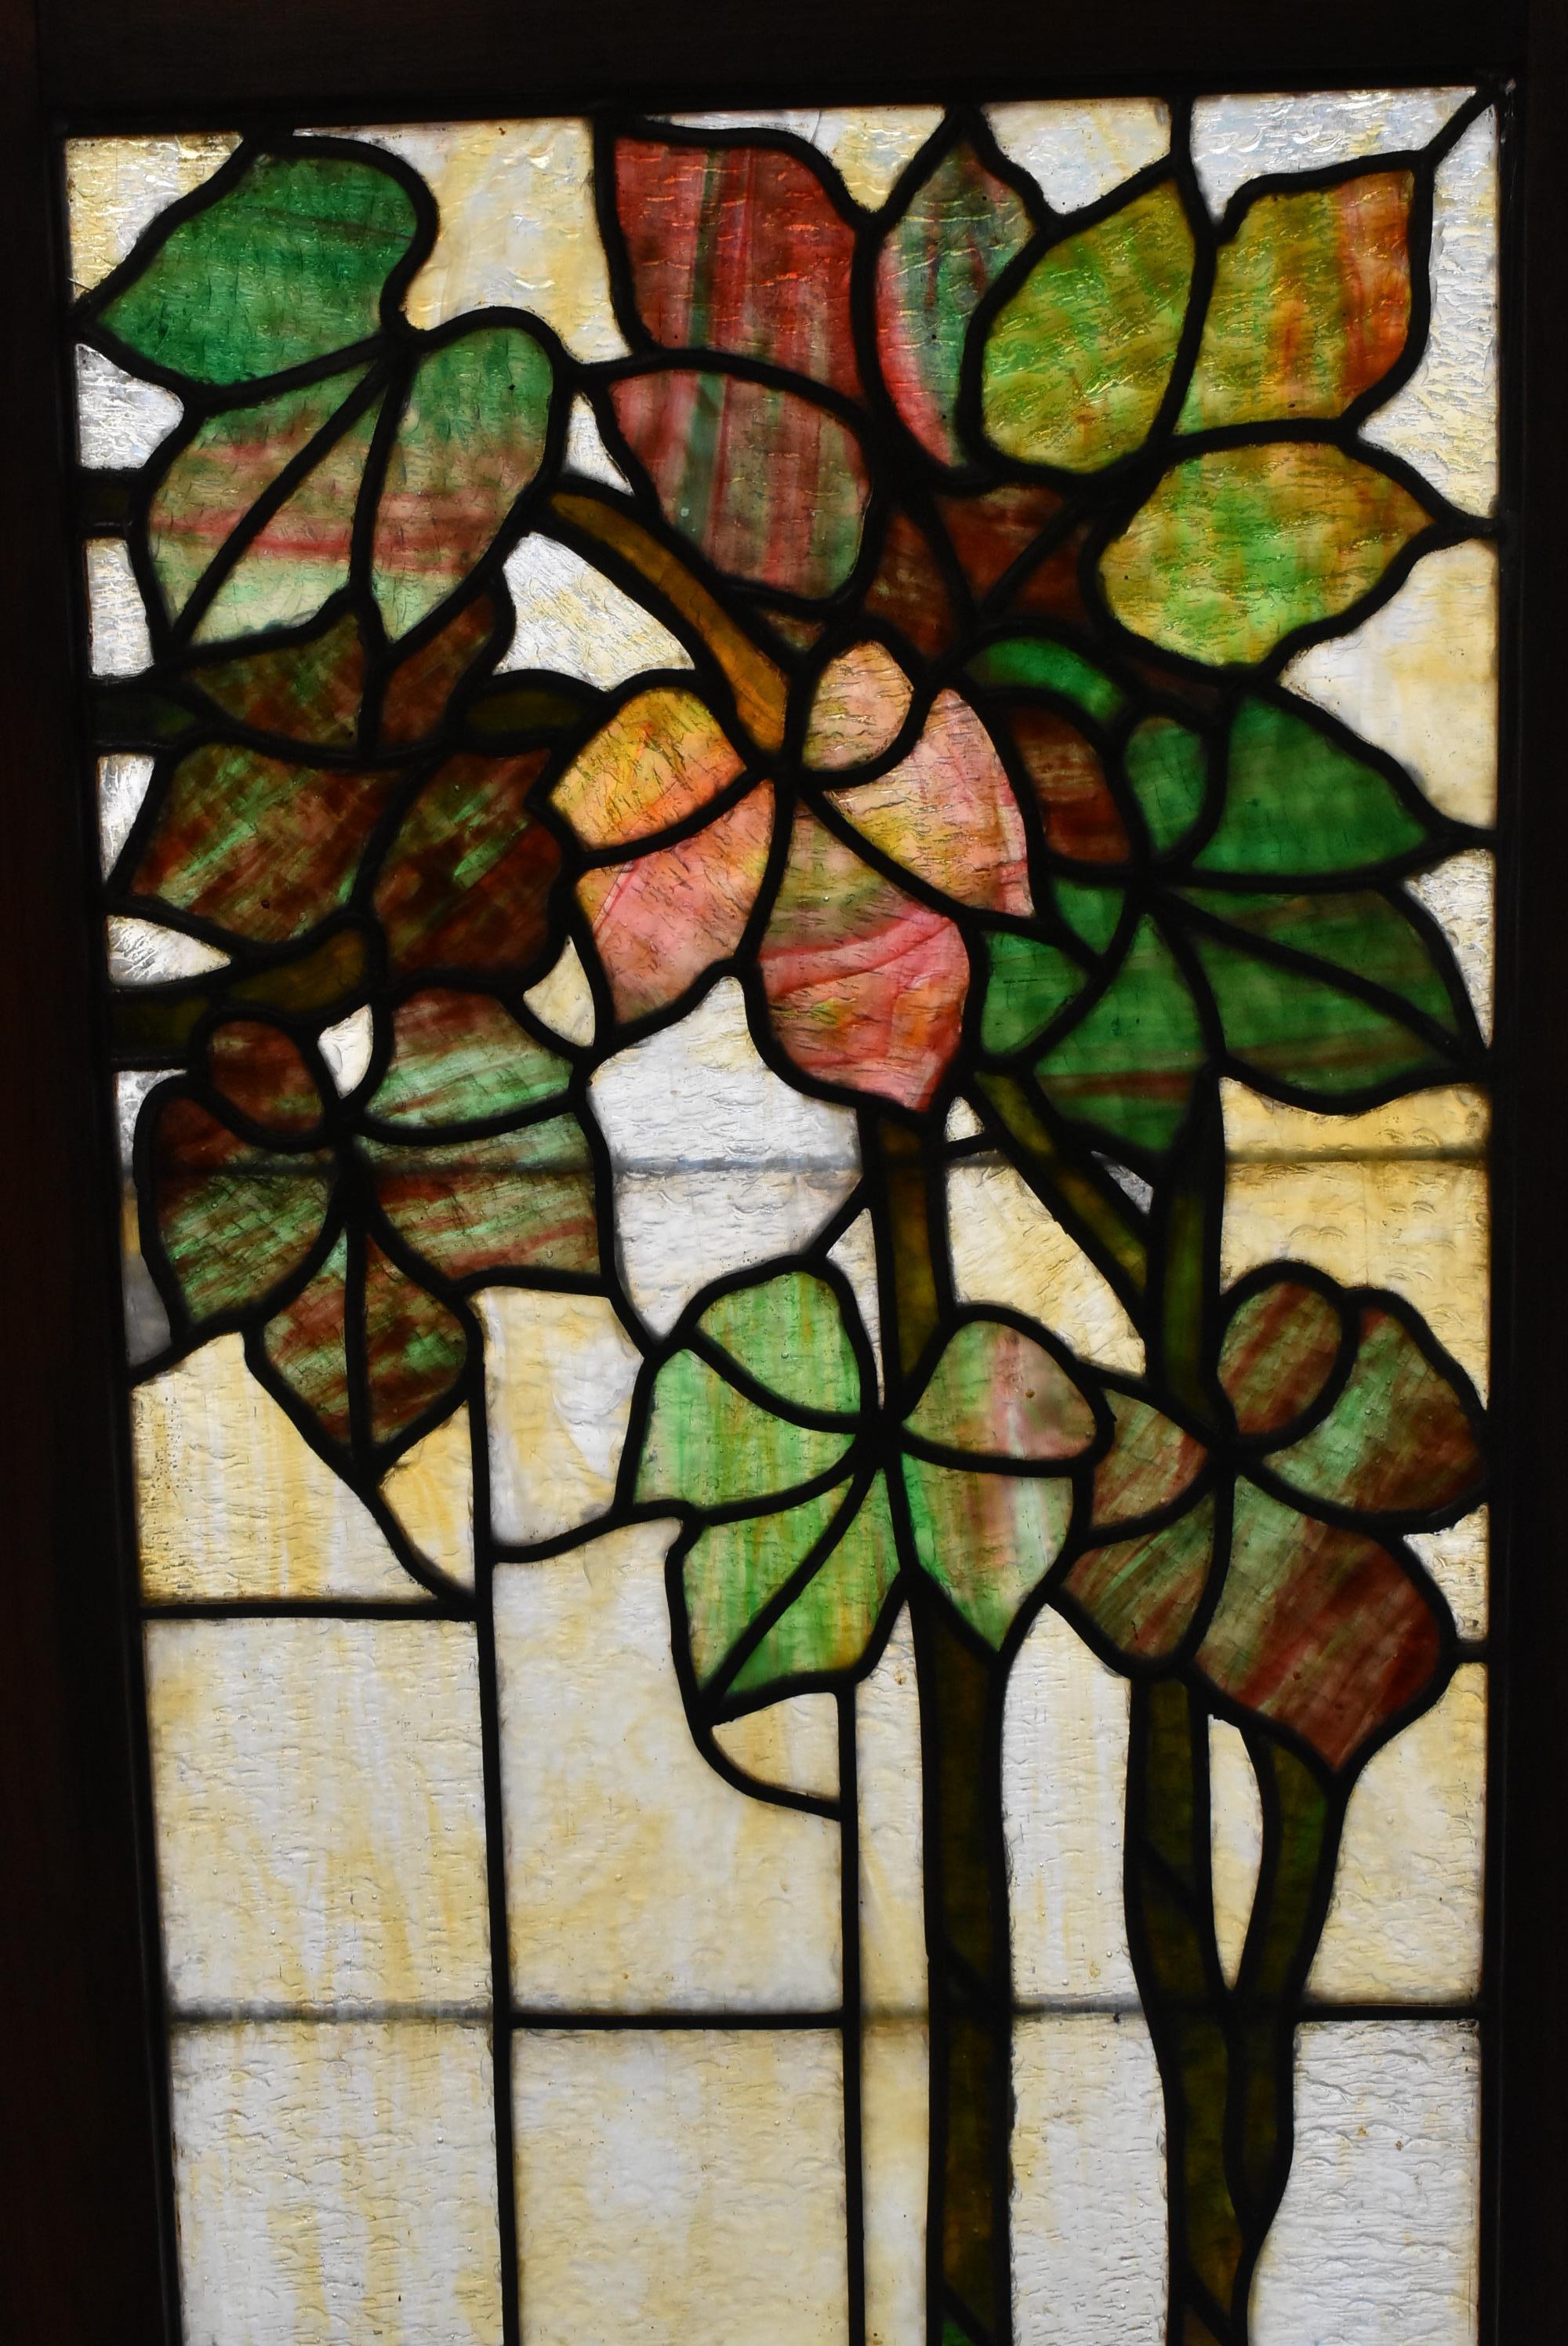 Antique turn of the century three-piece stained glass panels with grape leaf trellis design. Heavy granite back. New frames in oak.